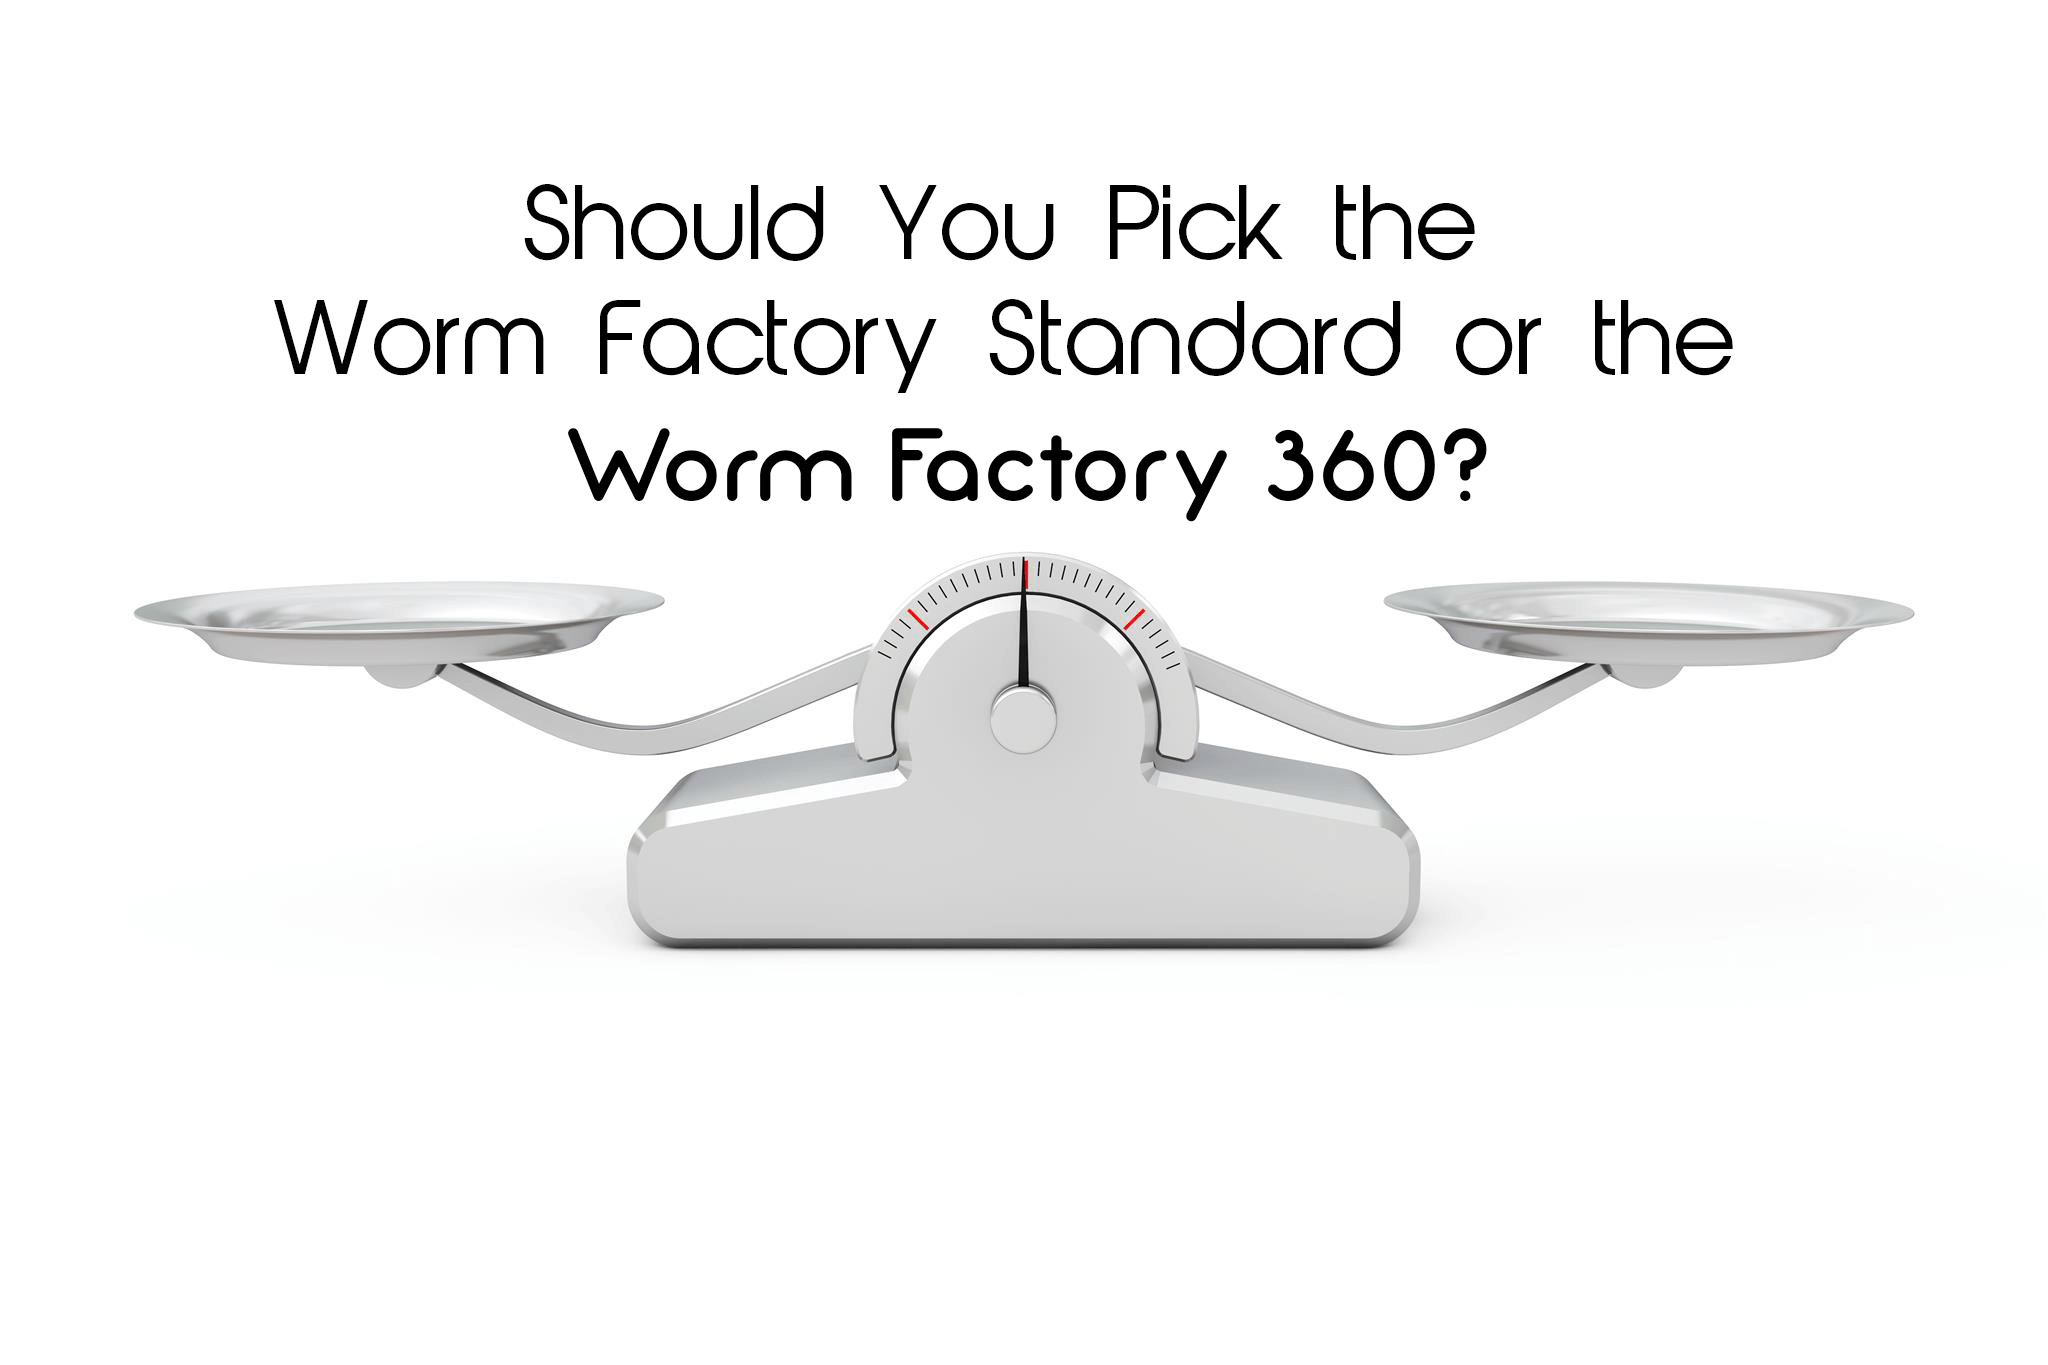 Should You Pick the Worm Factory Standard or the Worm Factory 360? 